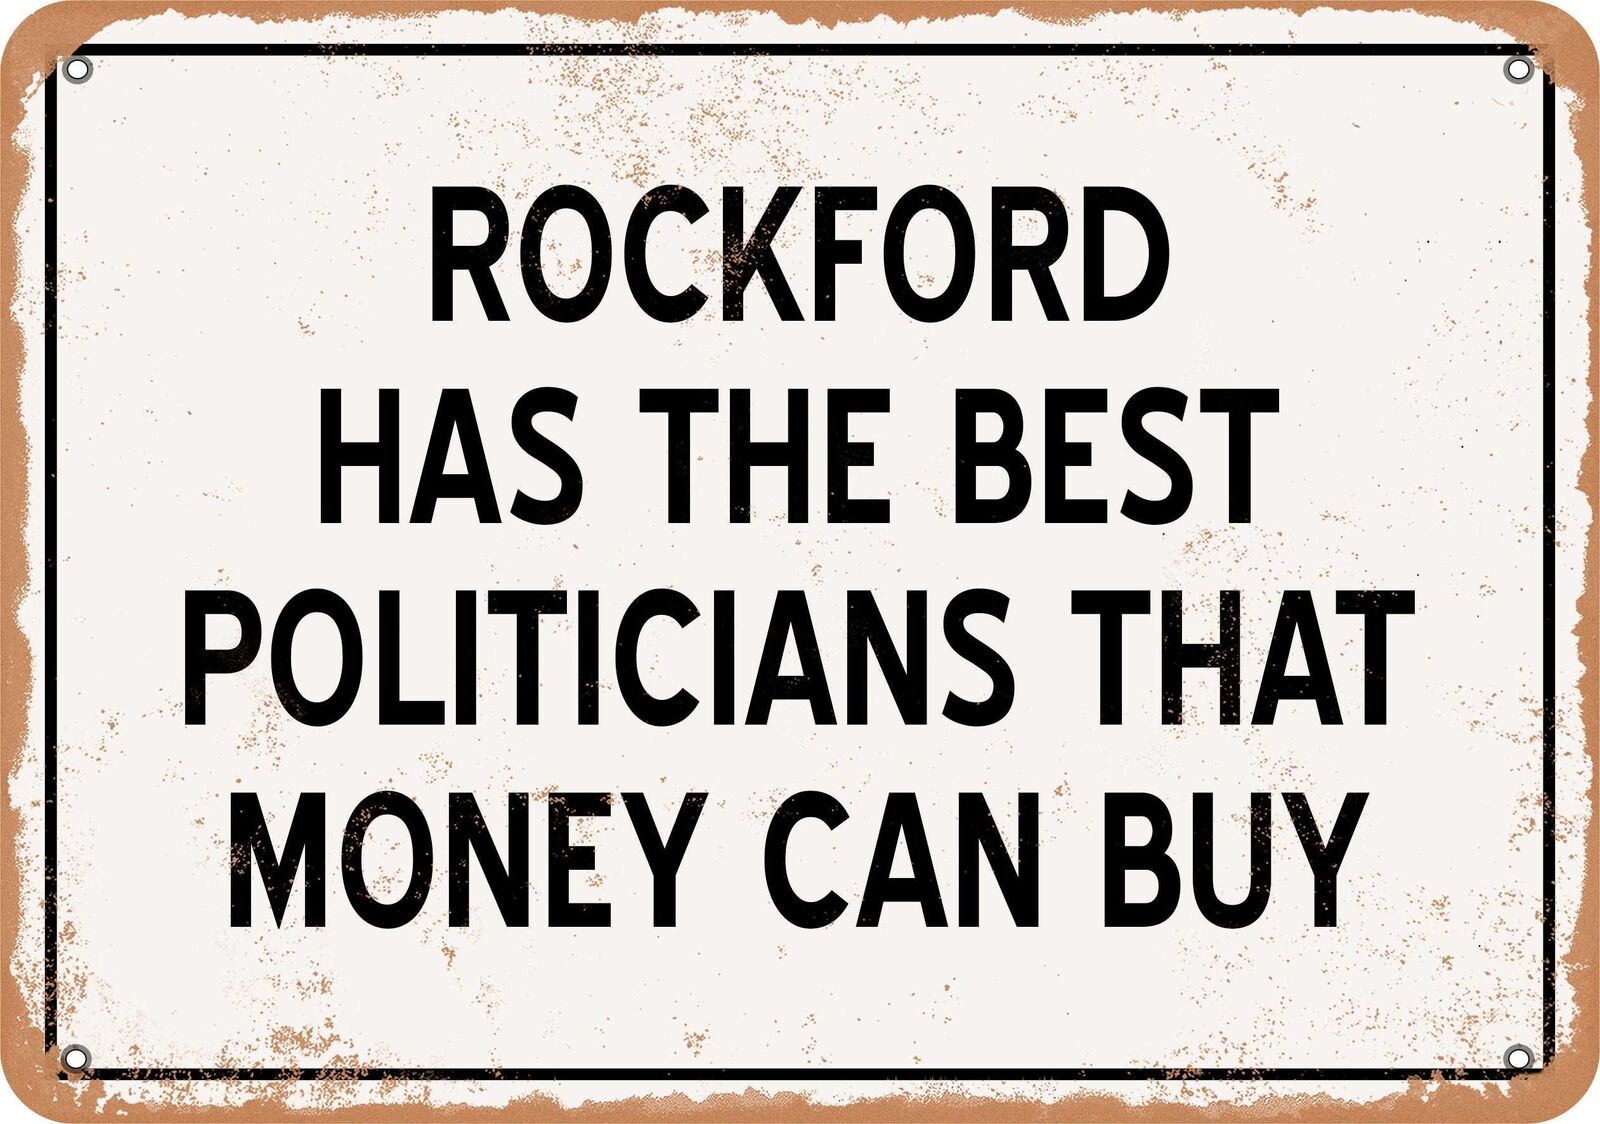 Metal Sign - Rockford Politicians Are the Best Money Can Buy - Rust Look